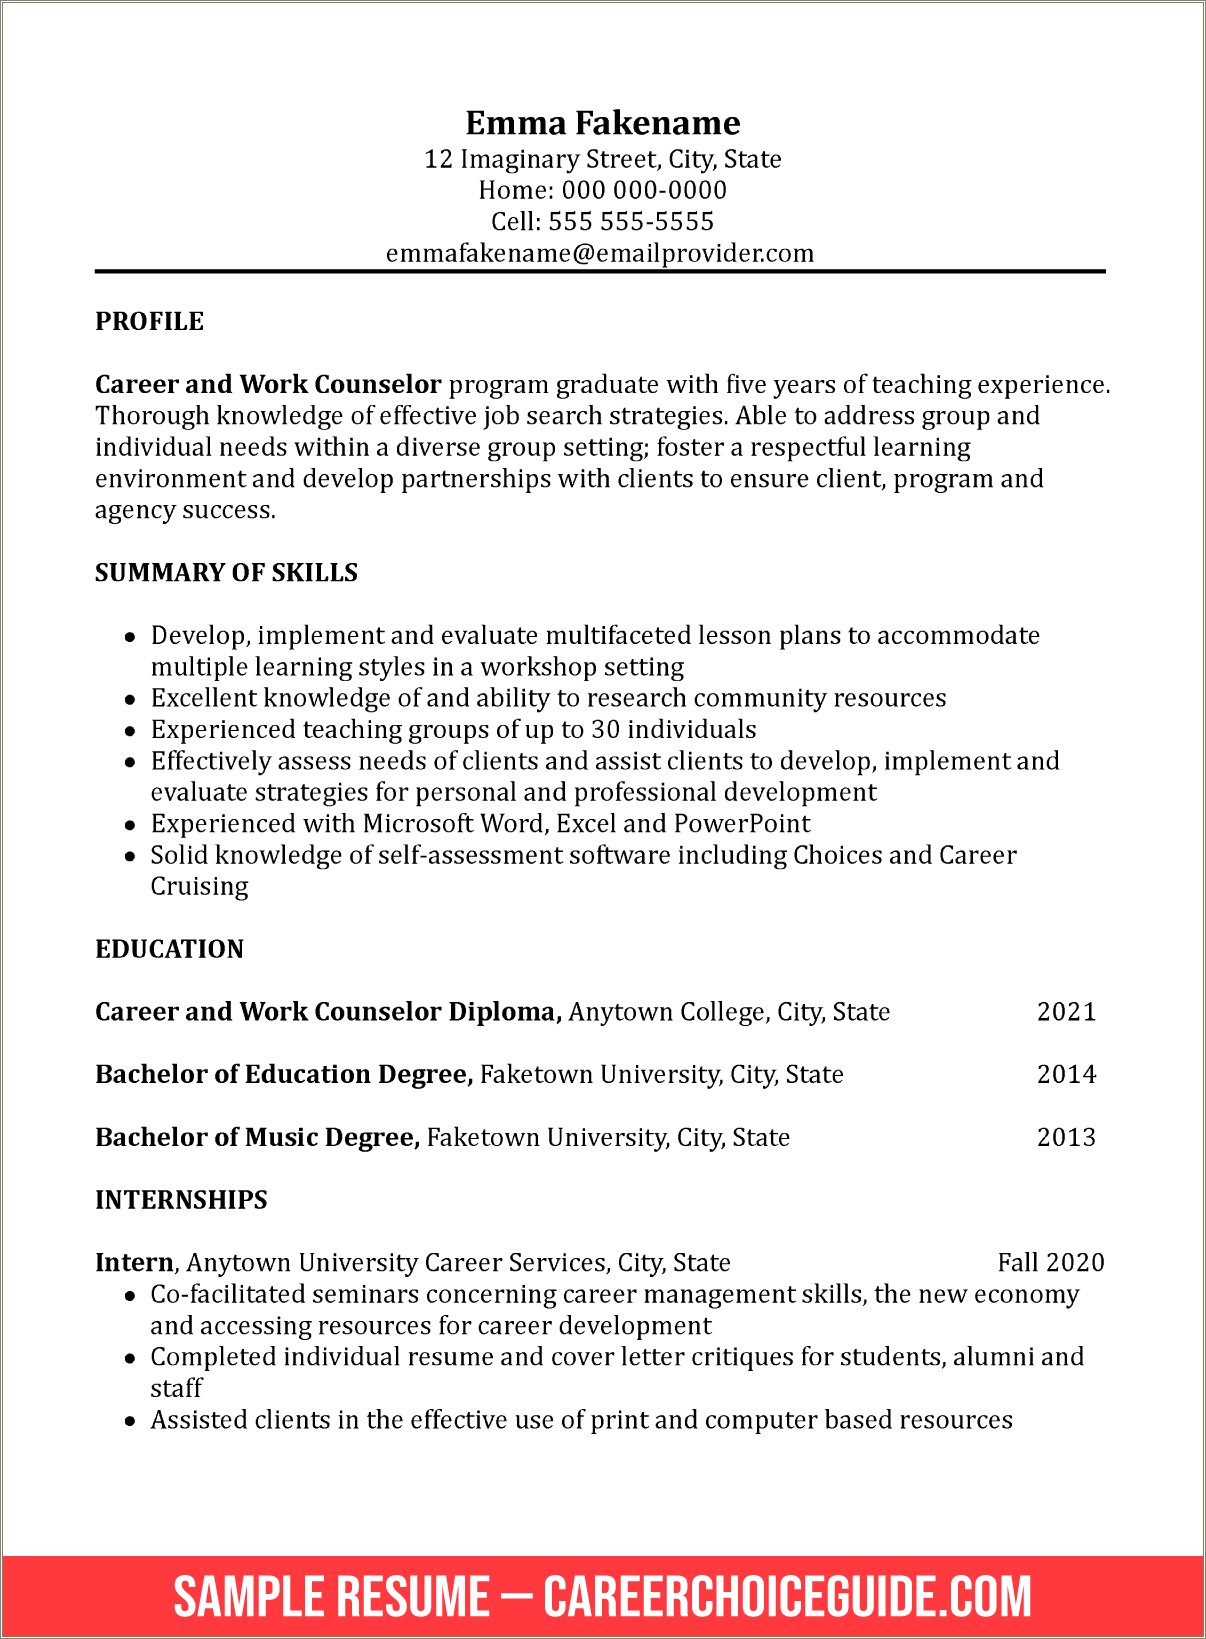 2019 Recent Resume Examples Career Changer